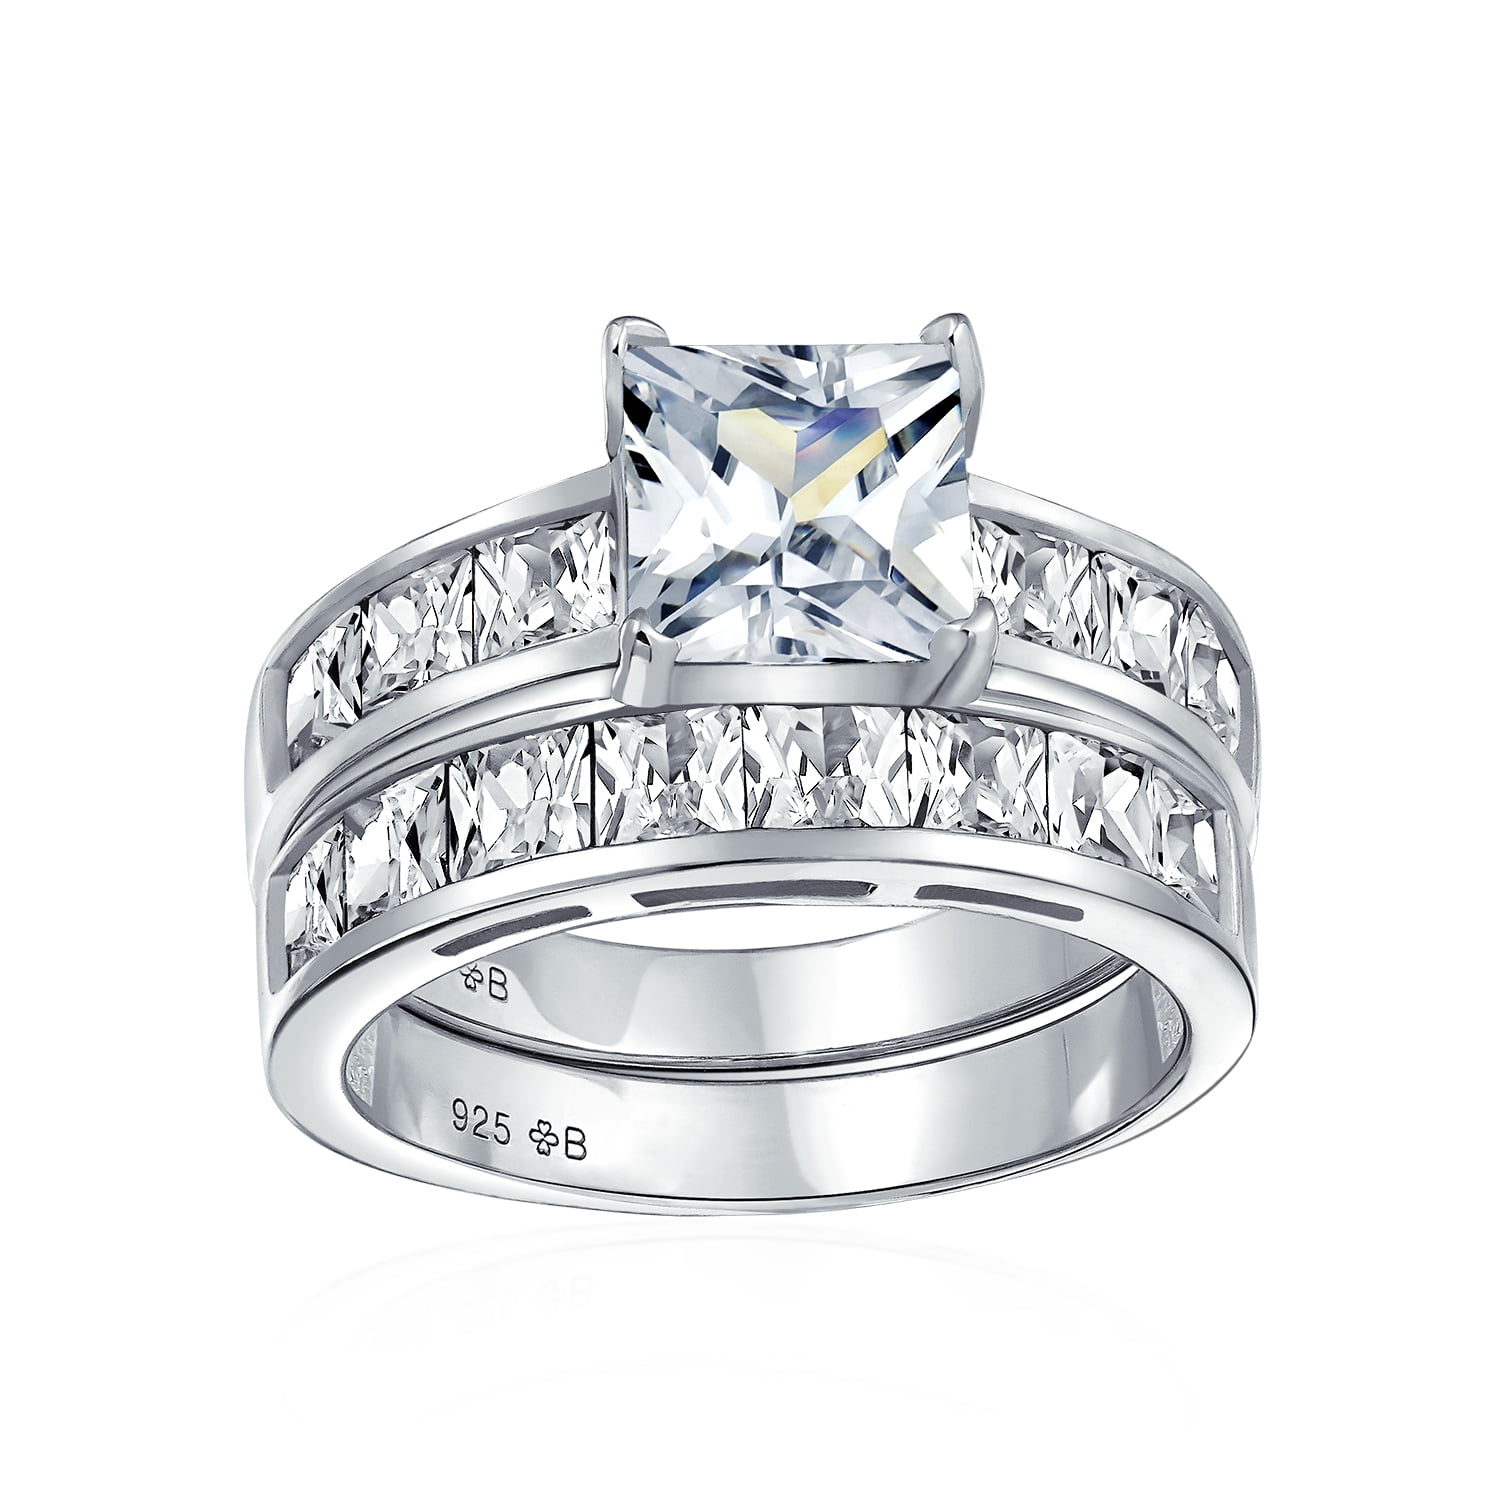 2.5 Ct Princess Square Clear CZ Stainless Steel Wedding Promise Anniversary Ring 